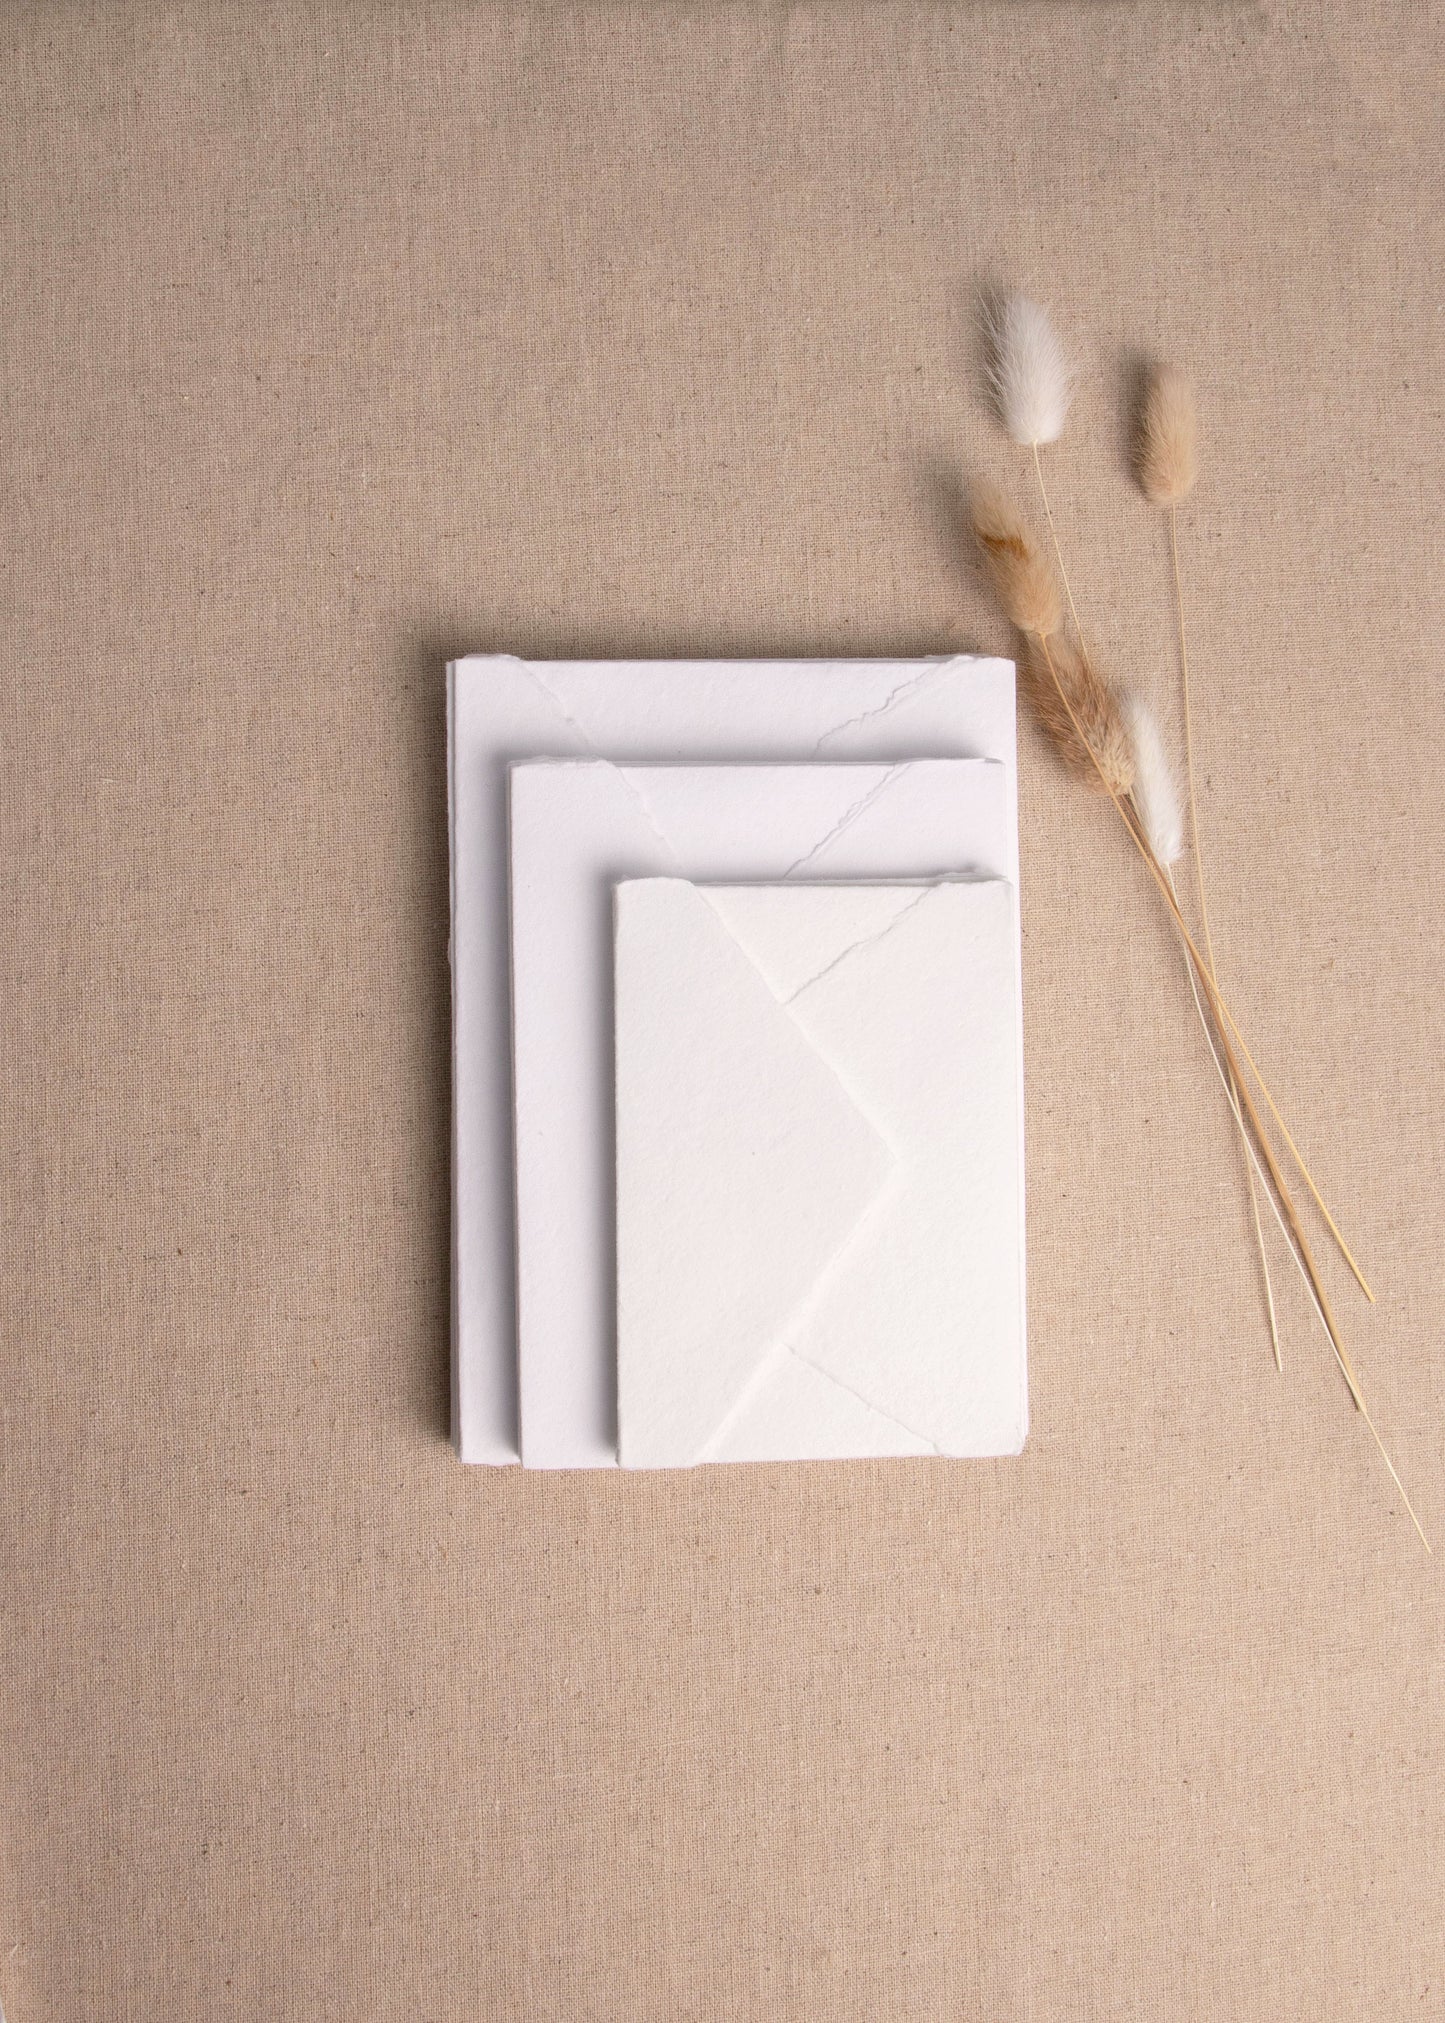 Pile of various sizes of White handmade paper and envelopes with       4. deckle edge on linen background with dried flowers